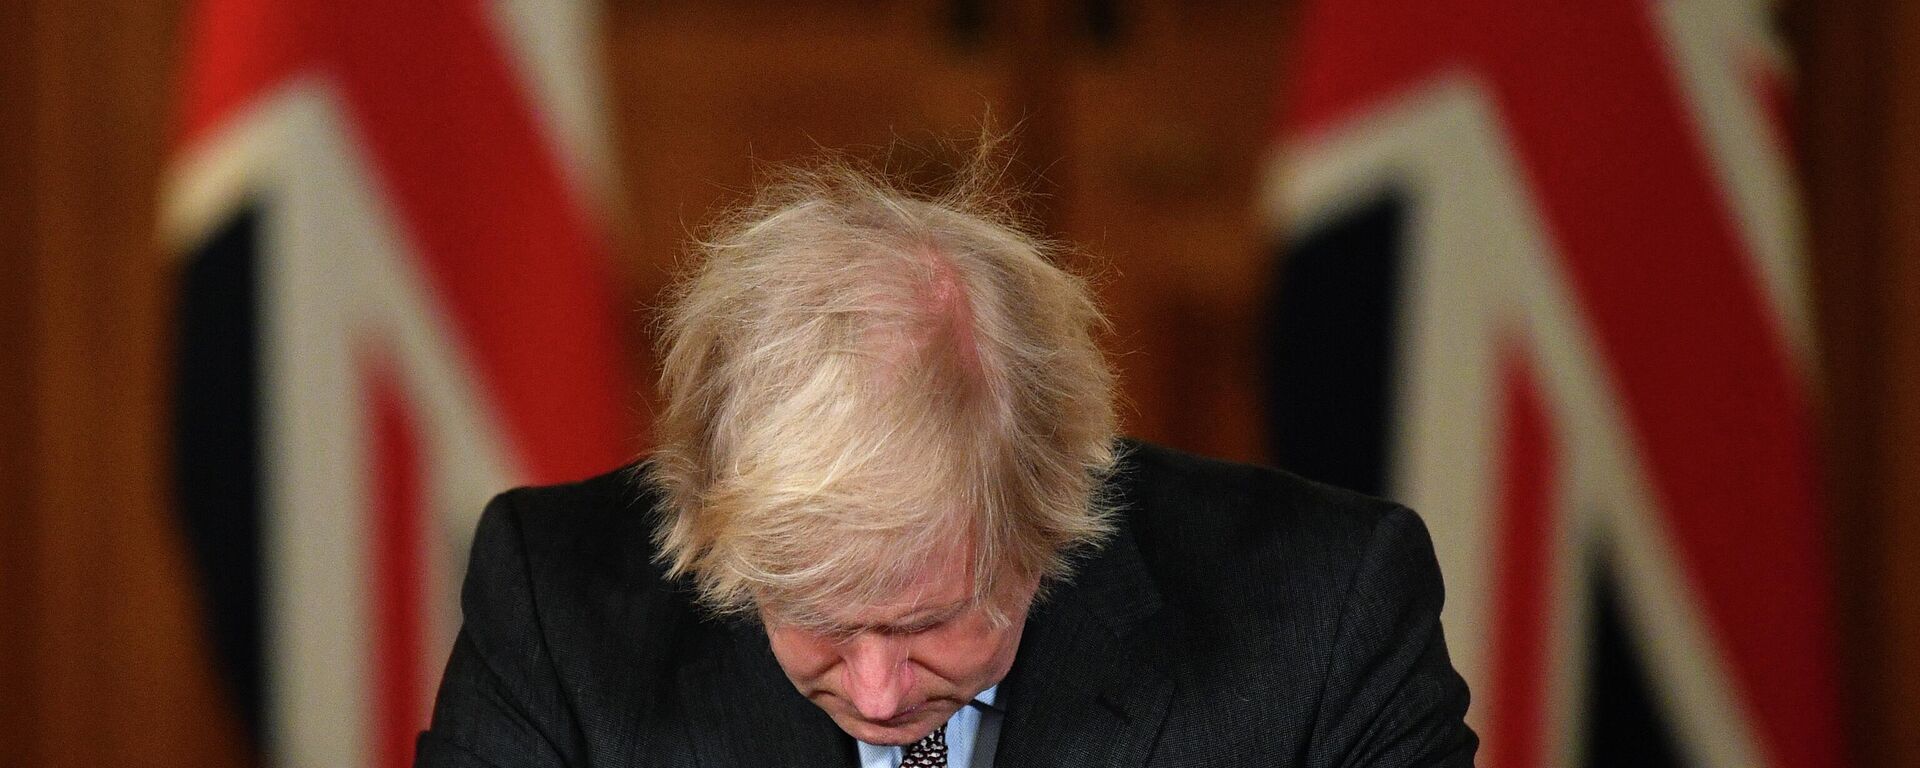 (FILES) In this file photo taken on January 26, 2021 Britain's Prime Minister Boris Johnson looks down at the podium as he attends a virtual press conference inside 10 Downing Street in central London. - Boris Johnson will resign as Conservative party leader on July 7, 2022 - Sputnik International, 1920, 07.07.2022